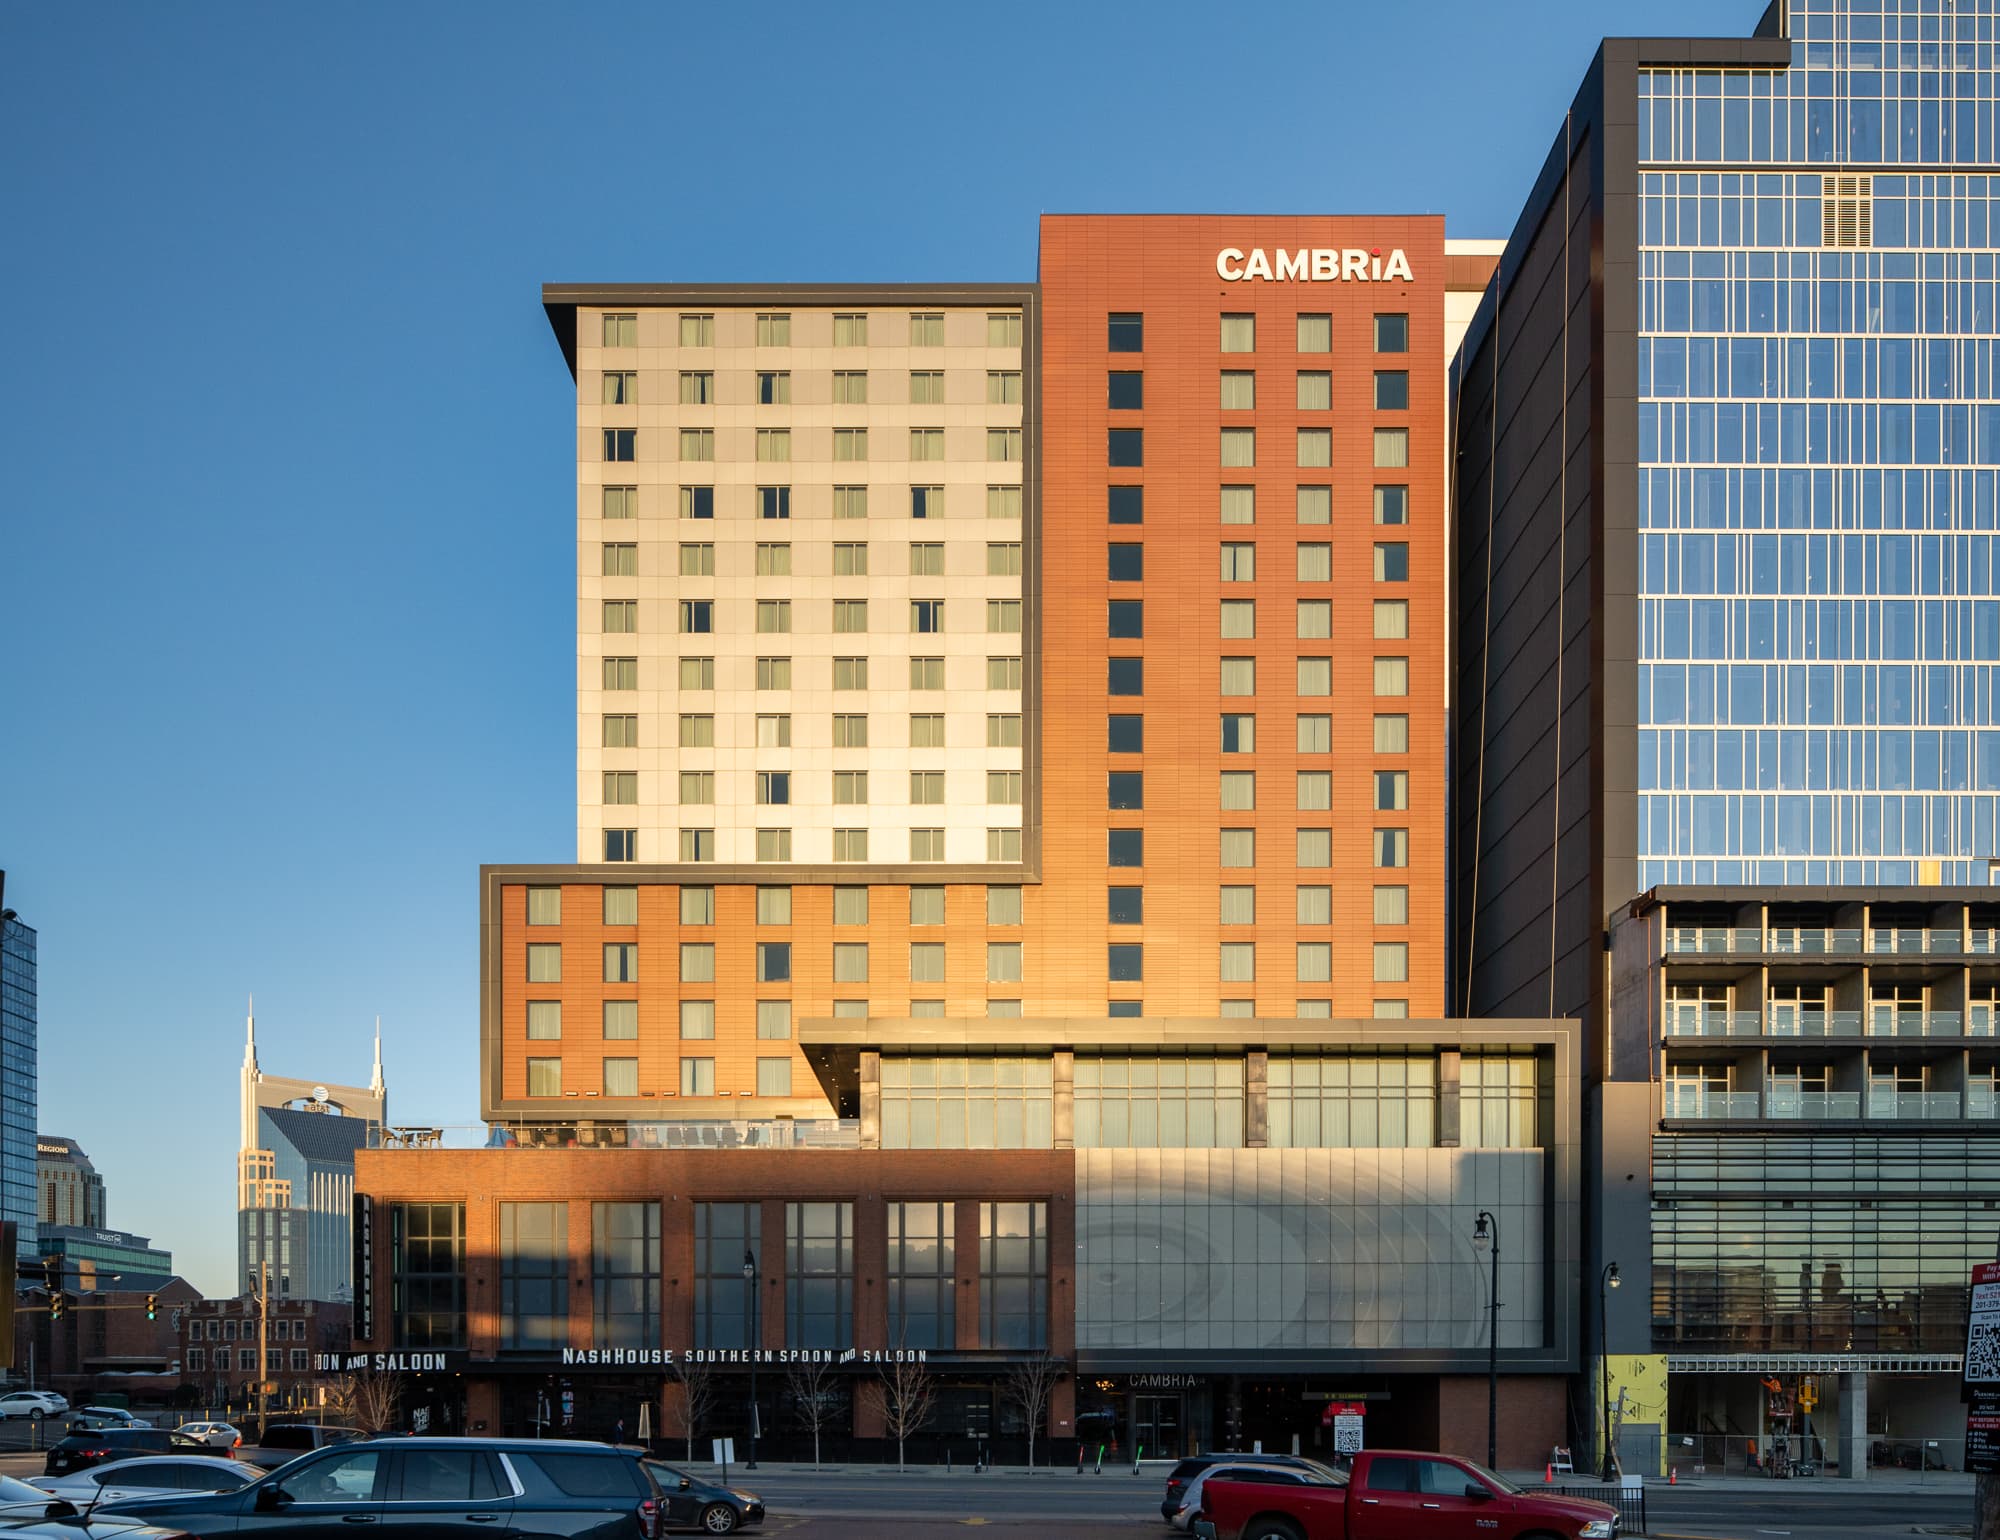 Photographing The Changing Light On The Cambria Hotel In Downtown